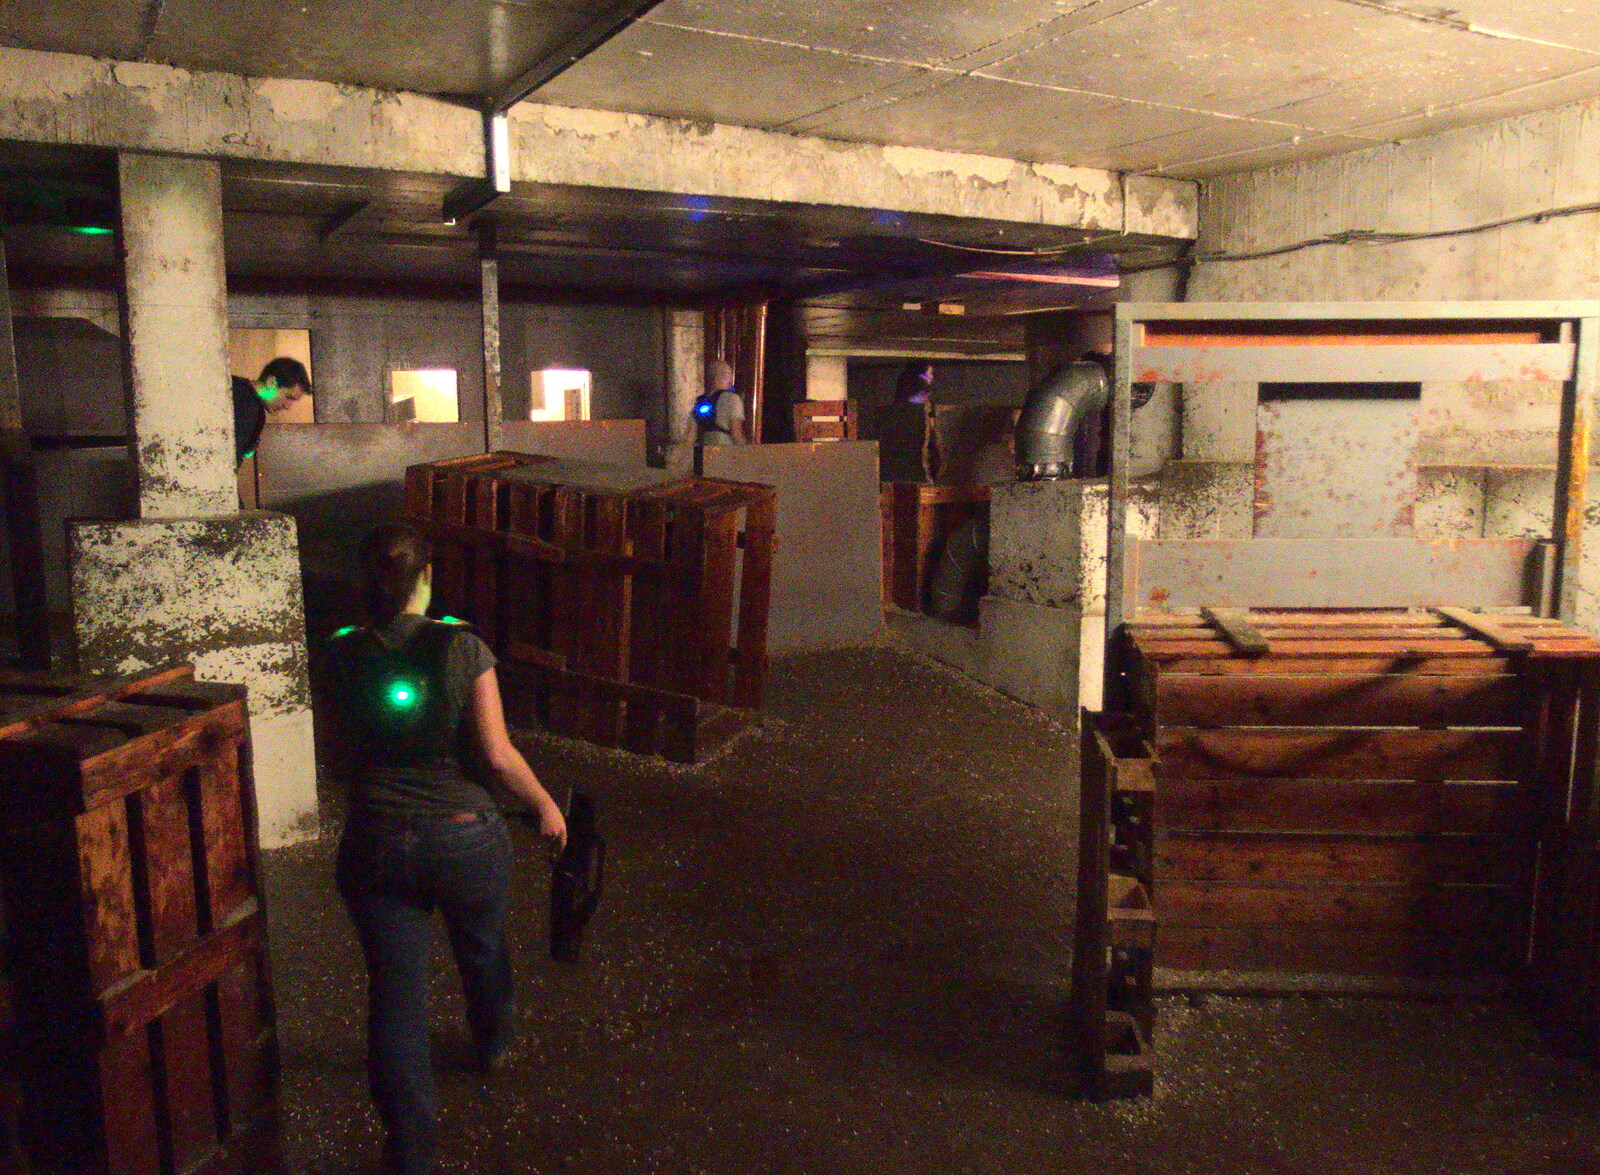 SwiftKey Does Laser Tag, Charlton and Greenwich, London - 29th November 2016: The underground lair